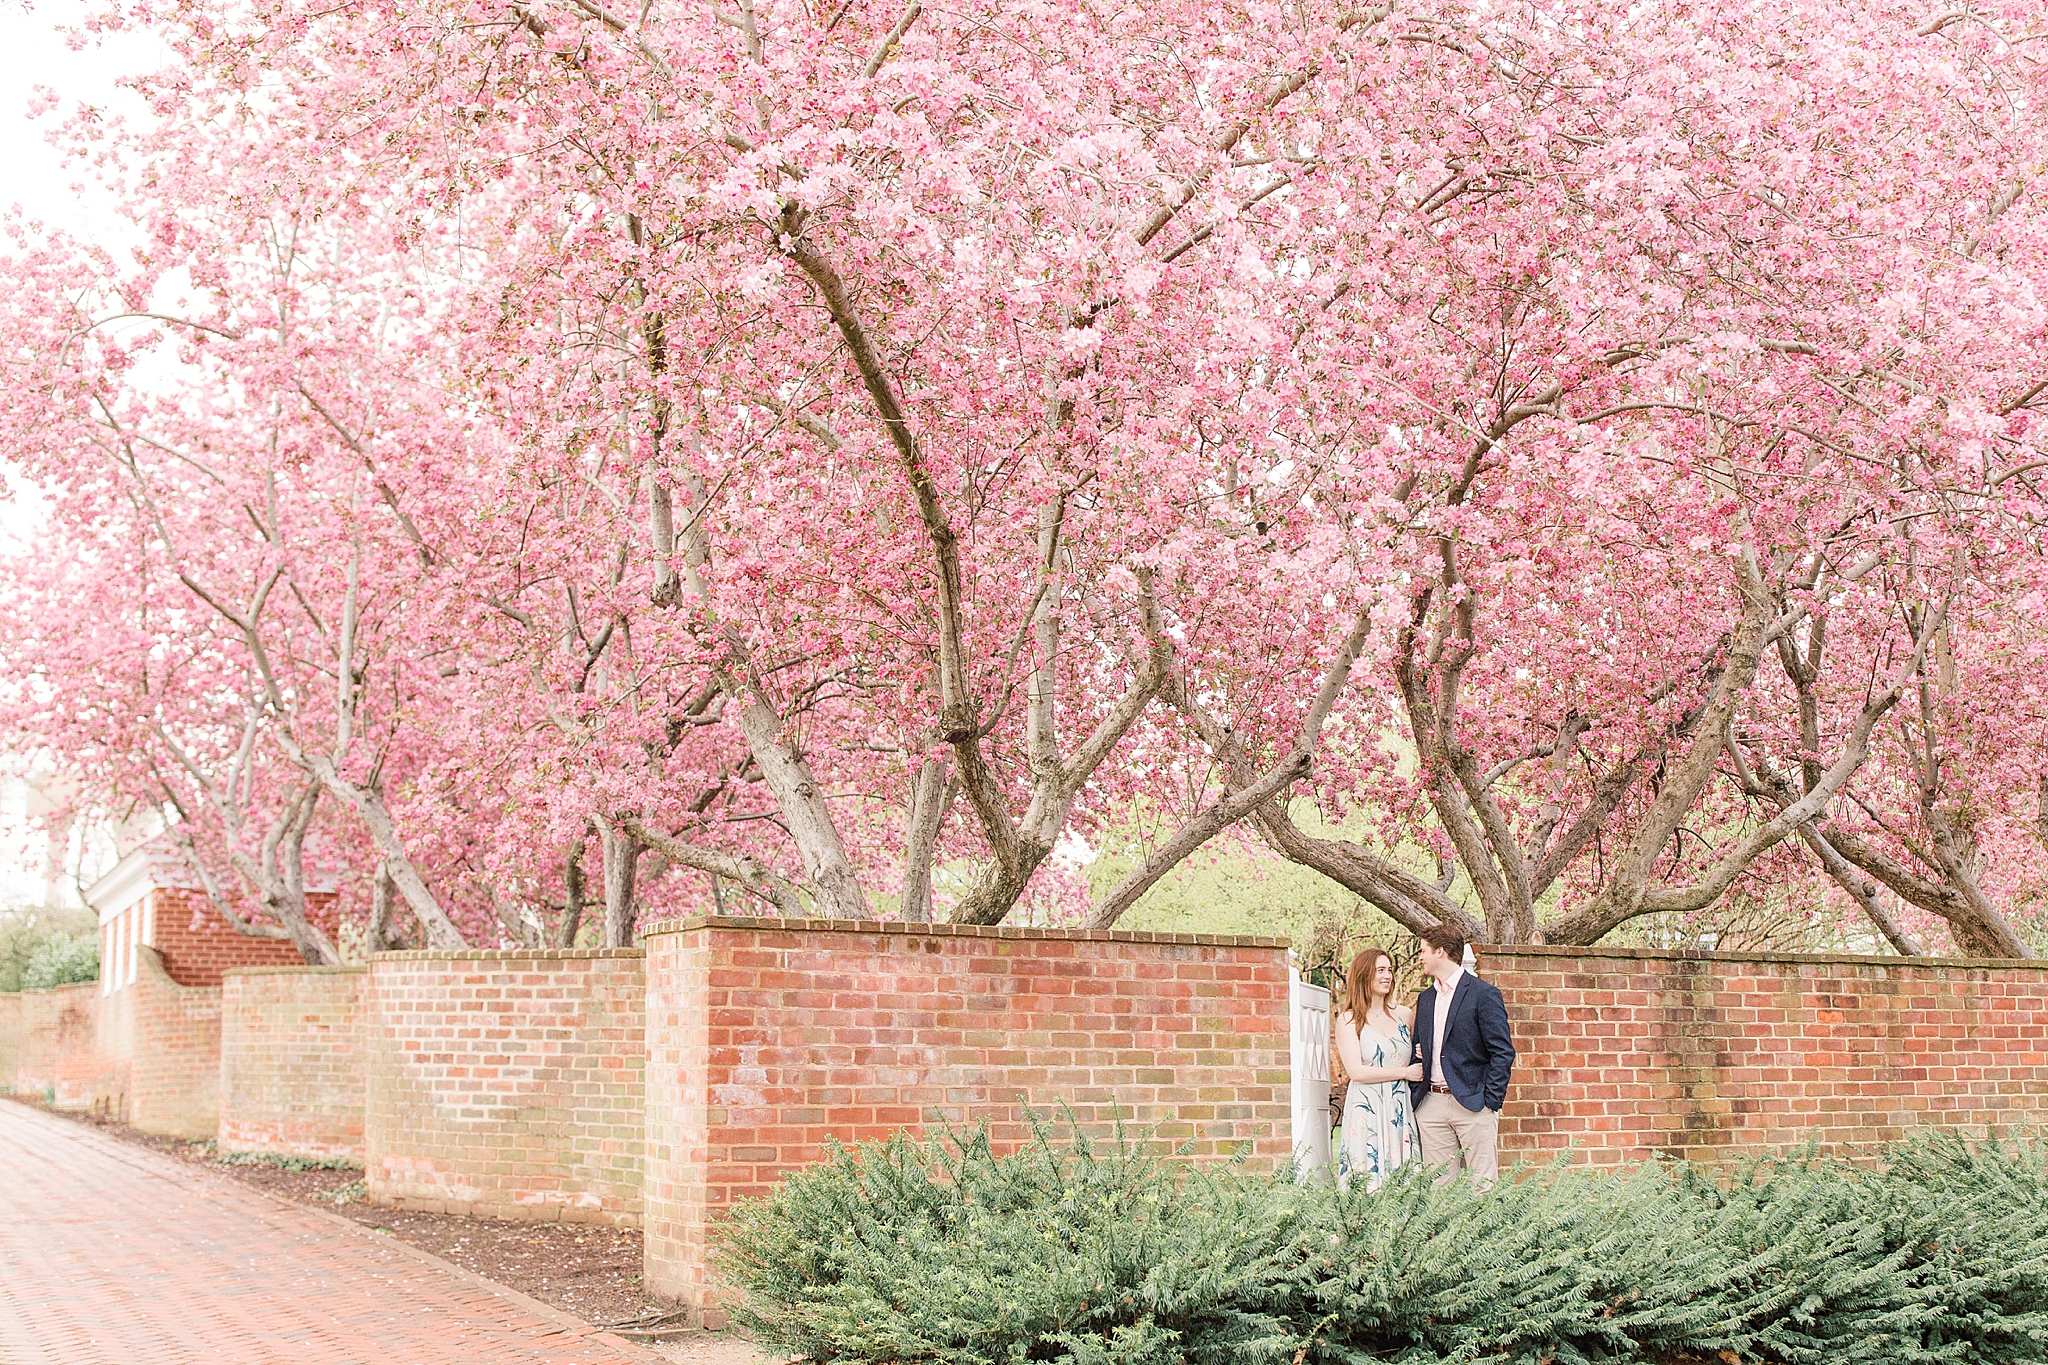 This fine art engagement session on the beautiful campus at the University of Virginia (UVA) includes the Rotunda, gardens, and other historic sites.